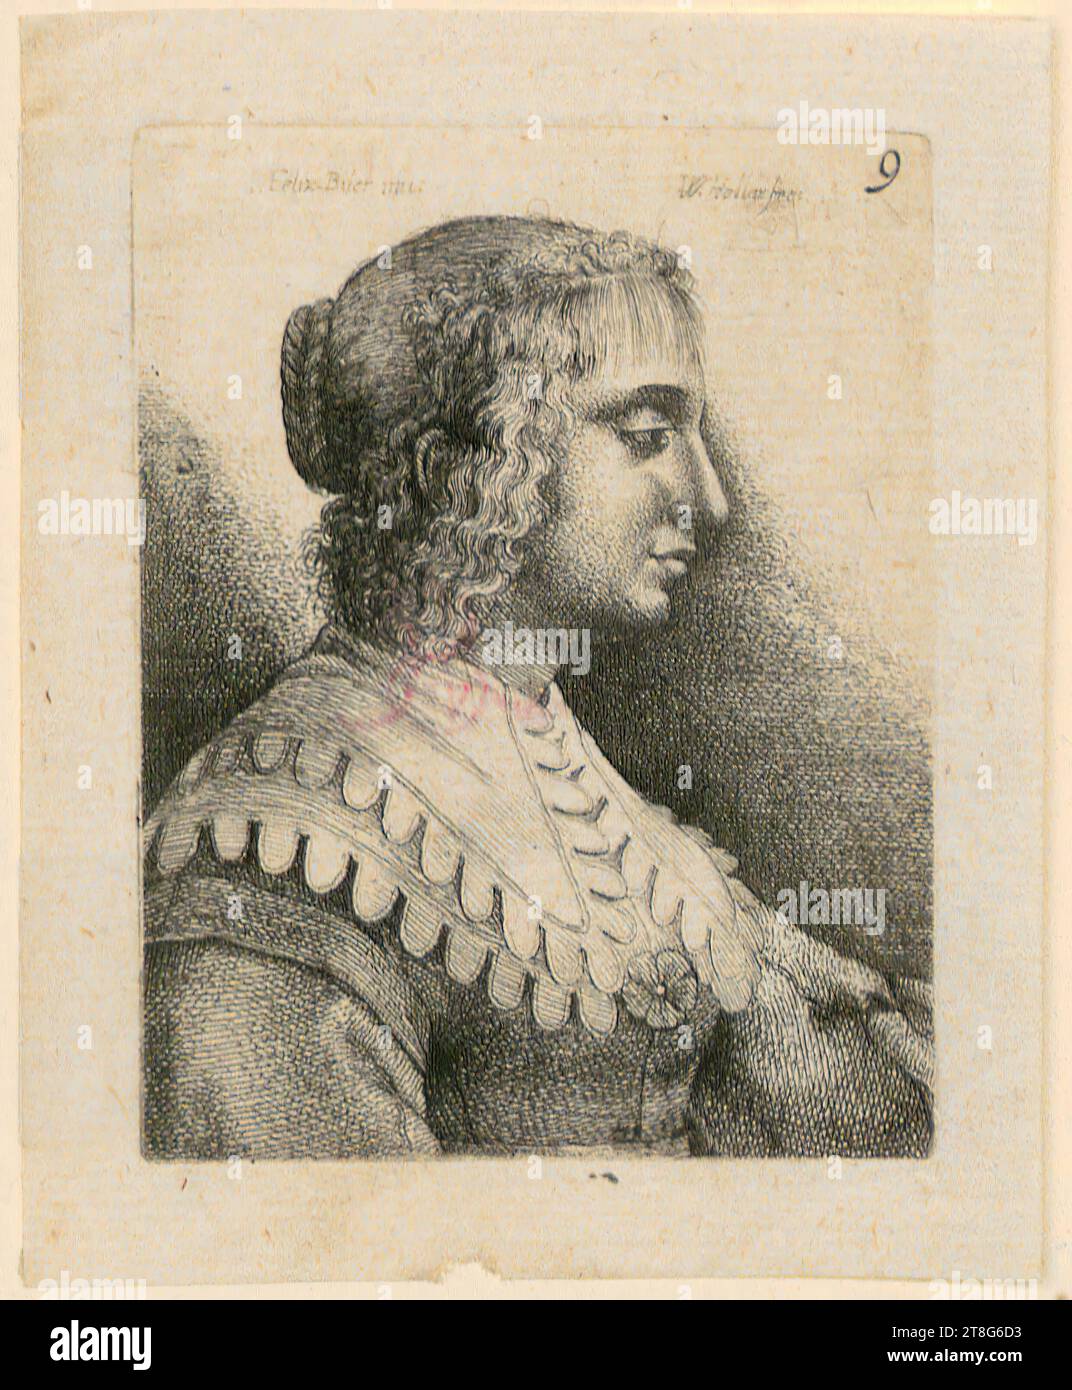 Wenzel Hollar (1607 - 1677)Jan van Bijlert (1597 um - 1671), after Abraham Hogenberg (1608 mentioned before - after 1653), editor, bust portrait of a woman with double shoulder collar, in profile to the right, sheet 9 of the set 'Reisebüchlein', origin of the print medium: 1636, etching, sheet size: 8.5 x 6.8 cm, inscribed upper left 'I. Felix-Biler inu:' and signed and numbered on the right 'W. Hollar fec: 9 Stock Photo